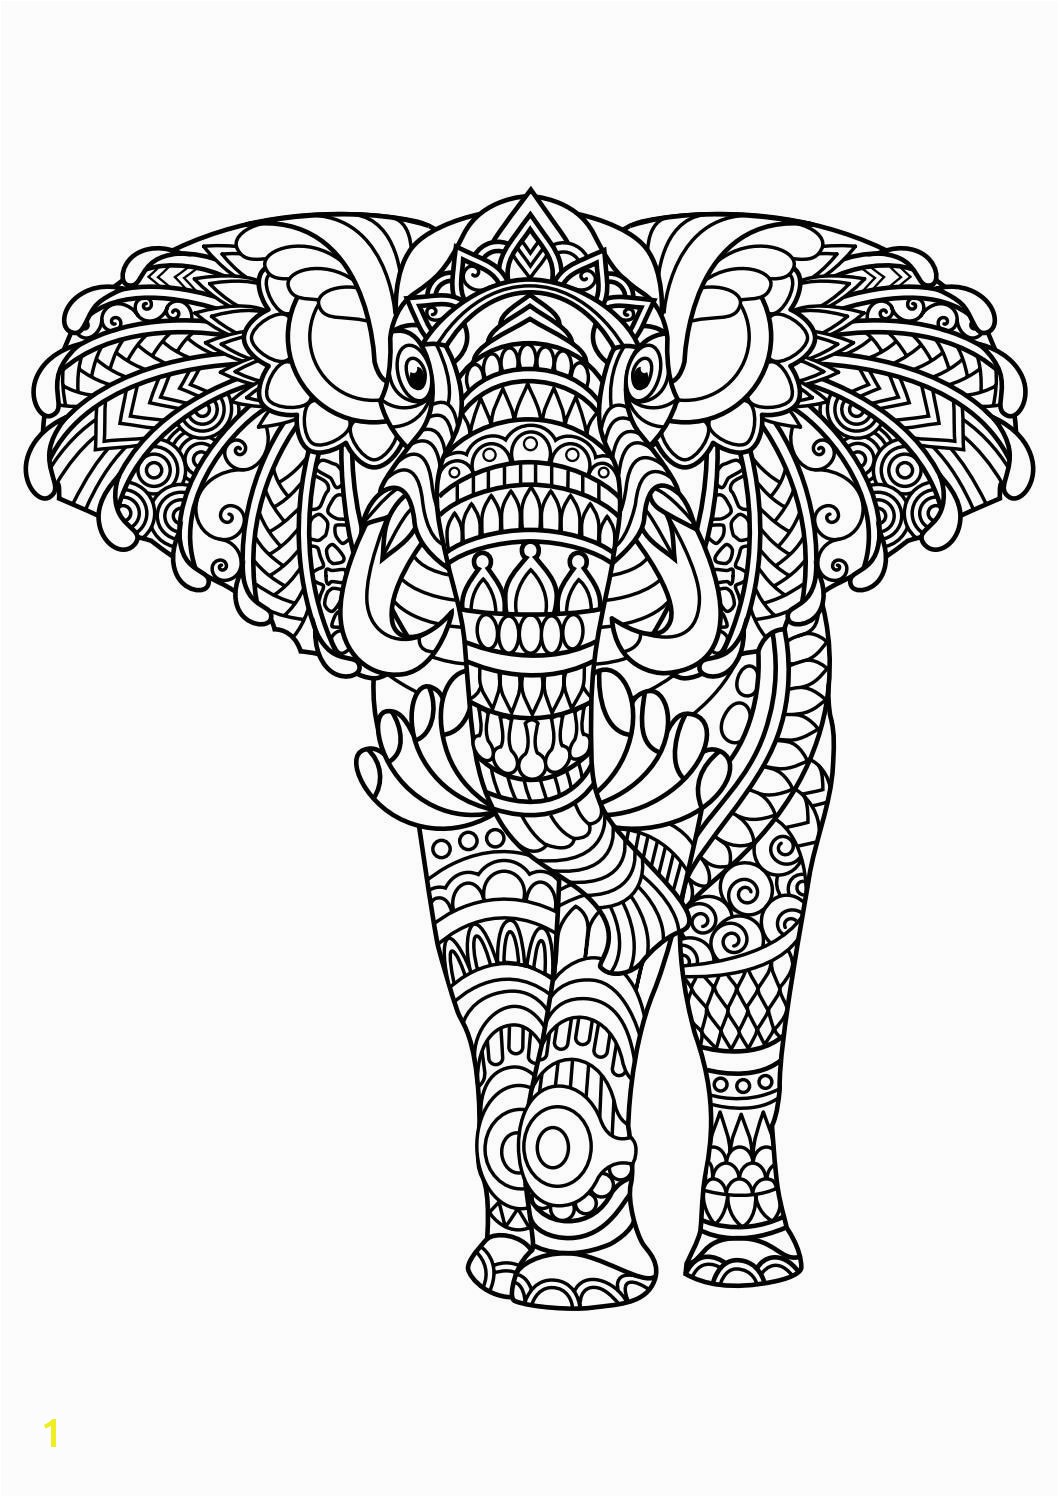 Animal coloring pages pdf Animal Coloring Pages is a free adult coloring book with 20 different animal pictures to color horse coloring pages dog cat